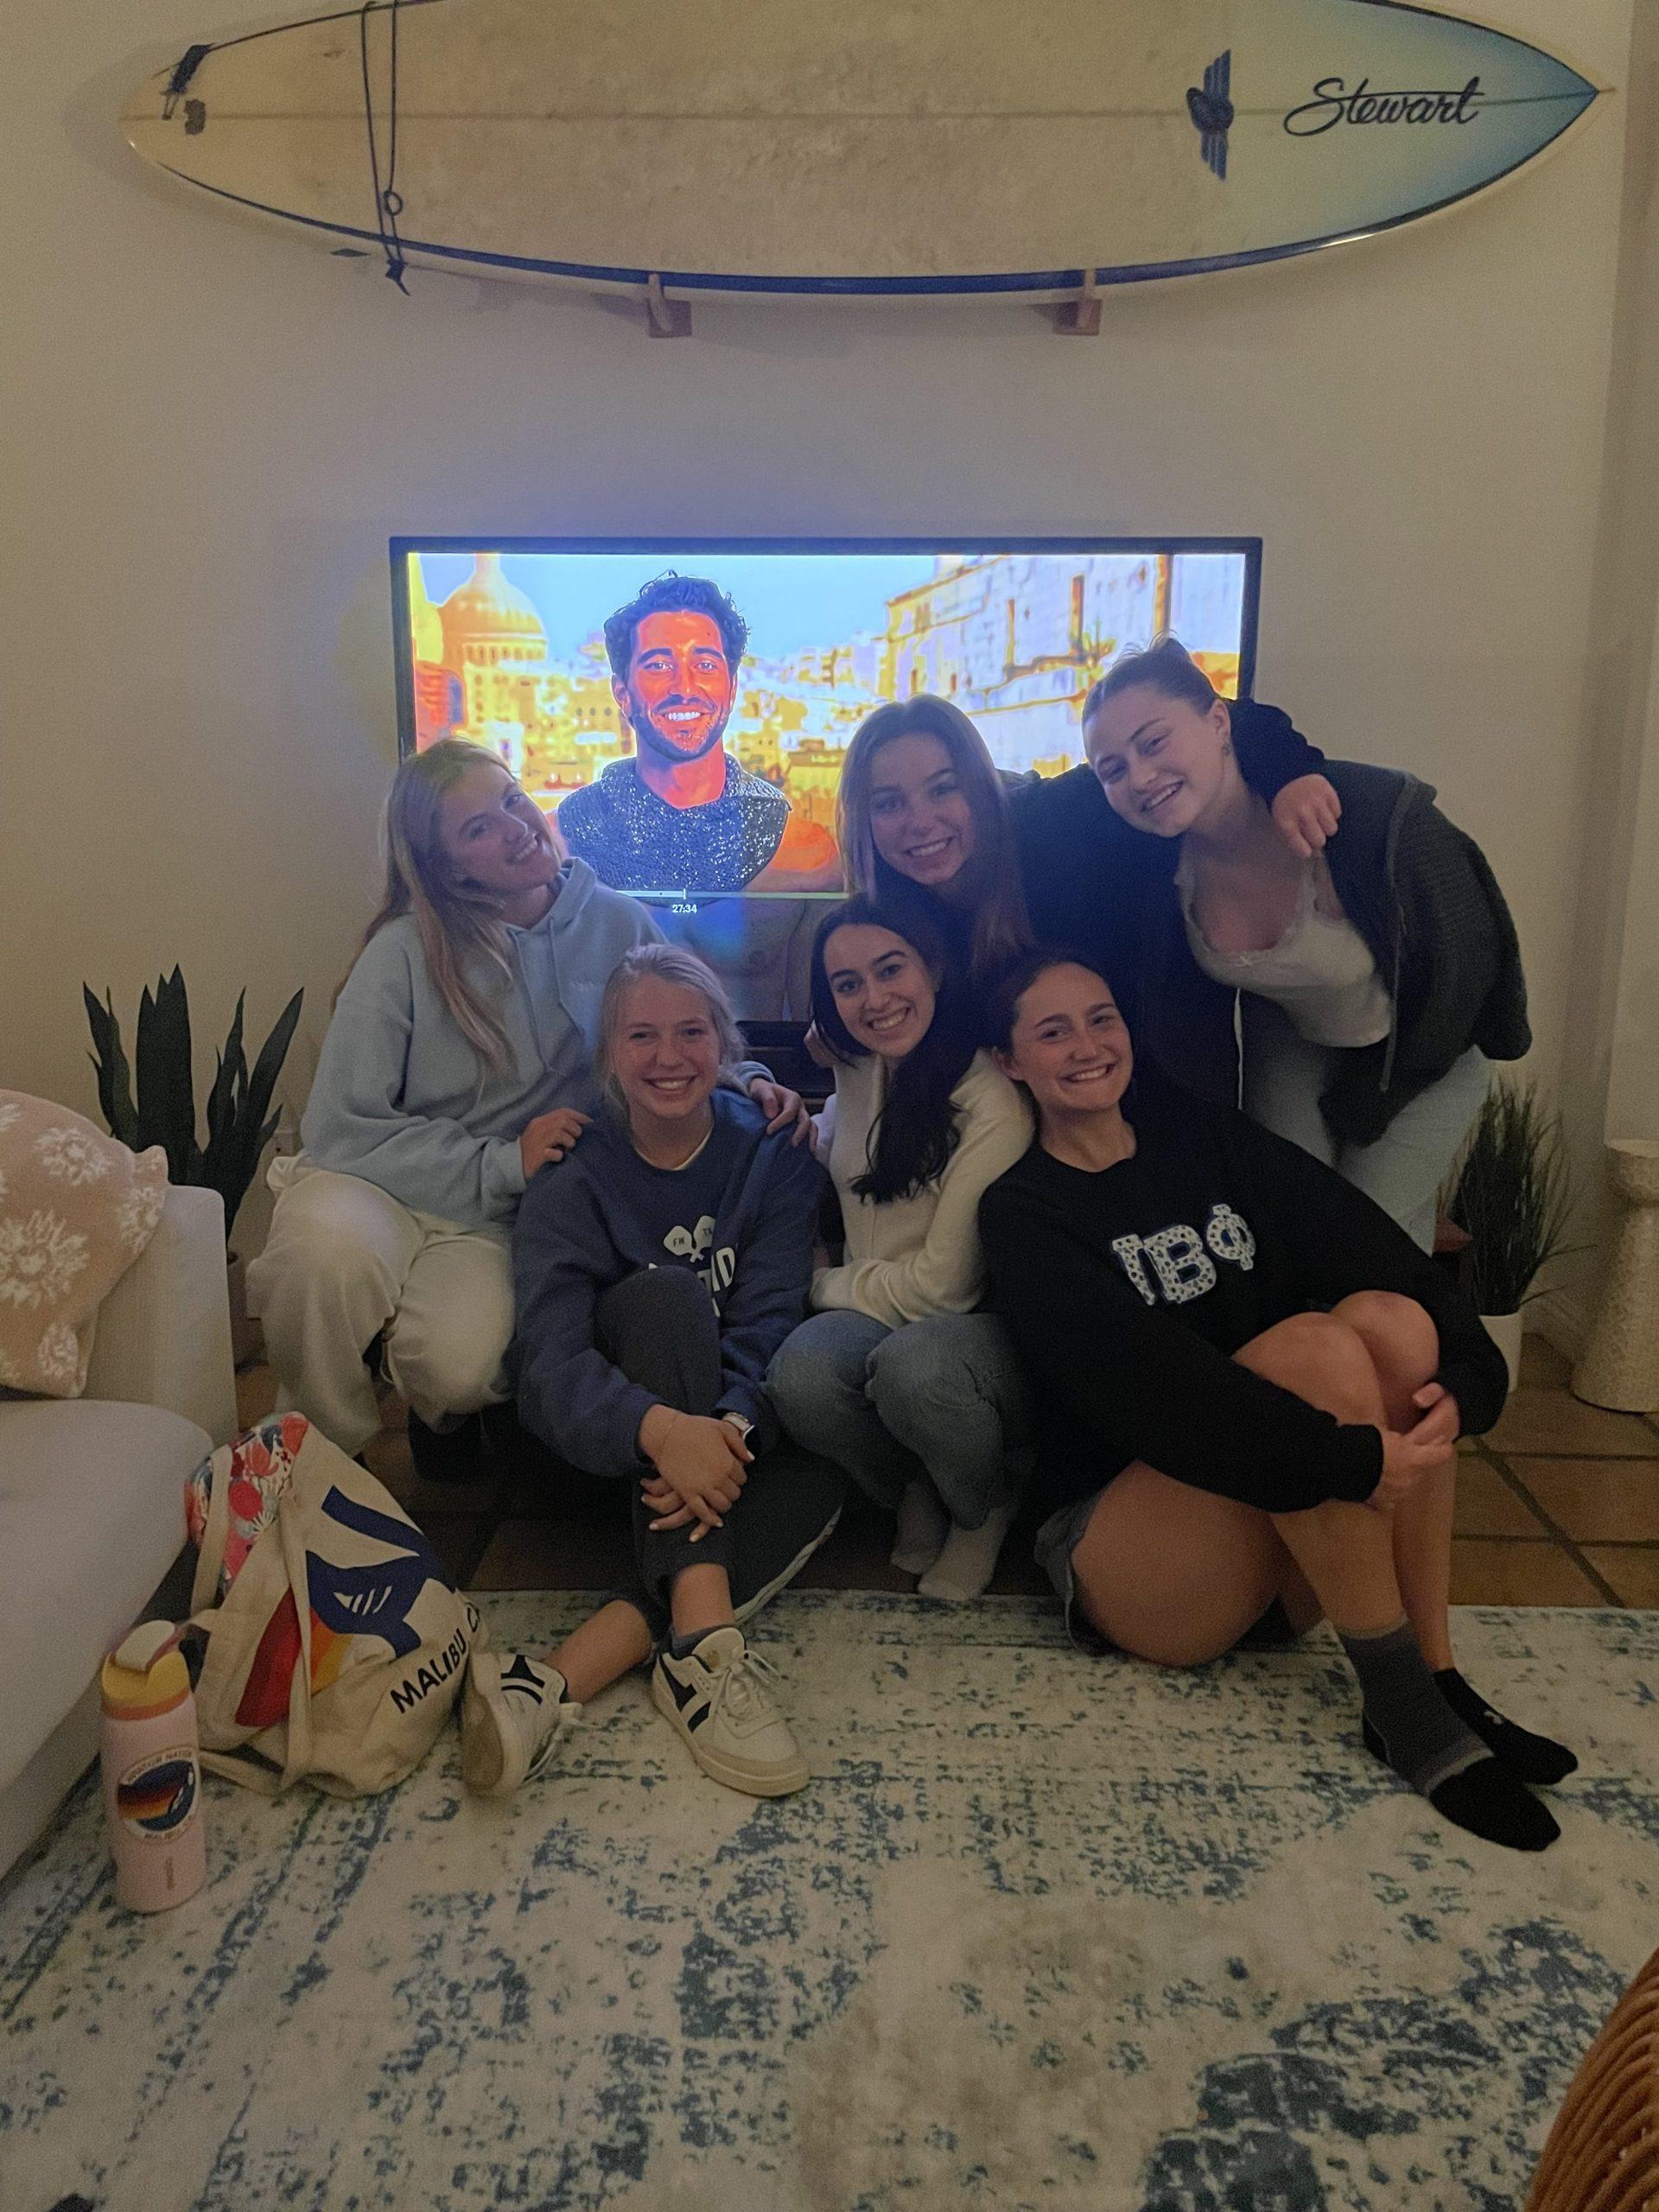 Avrey Roberts (left) joins her group of six, The Bachelor Baddies, at her friend's house March 11. Roberts said they met each week since the first episode to catch up and watch the show together. Photo courtesy of Avrey Roberts